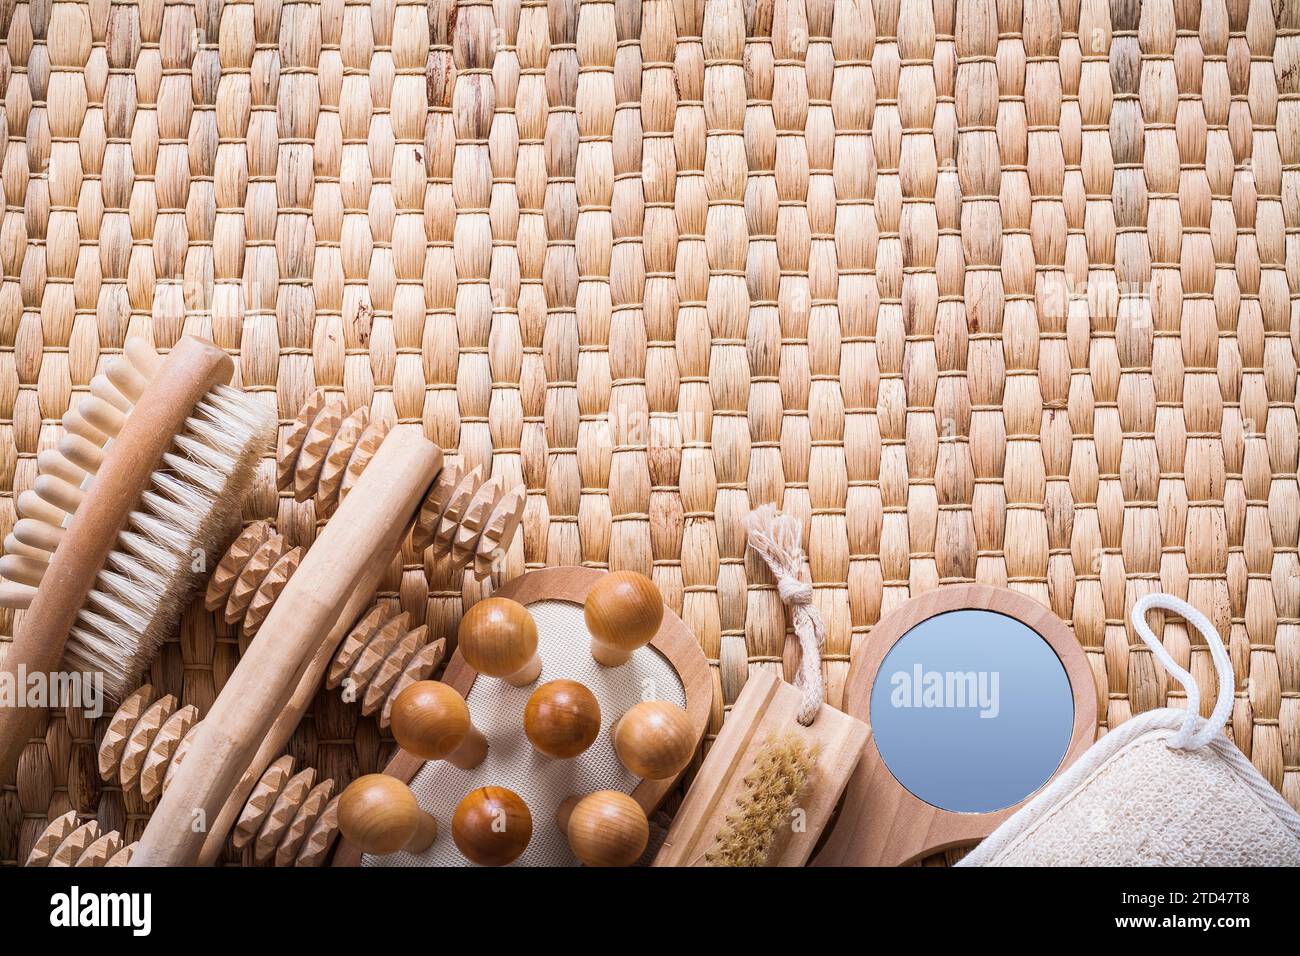 Horizontal view of sauna articles on a wicker mat Health concept Stock Photo